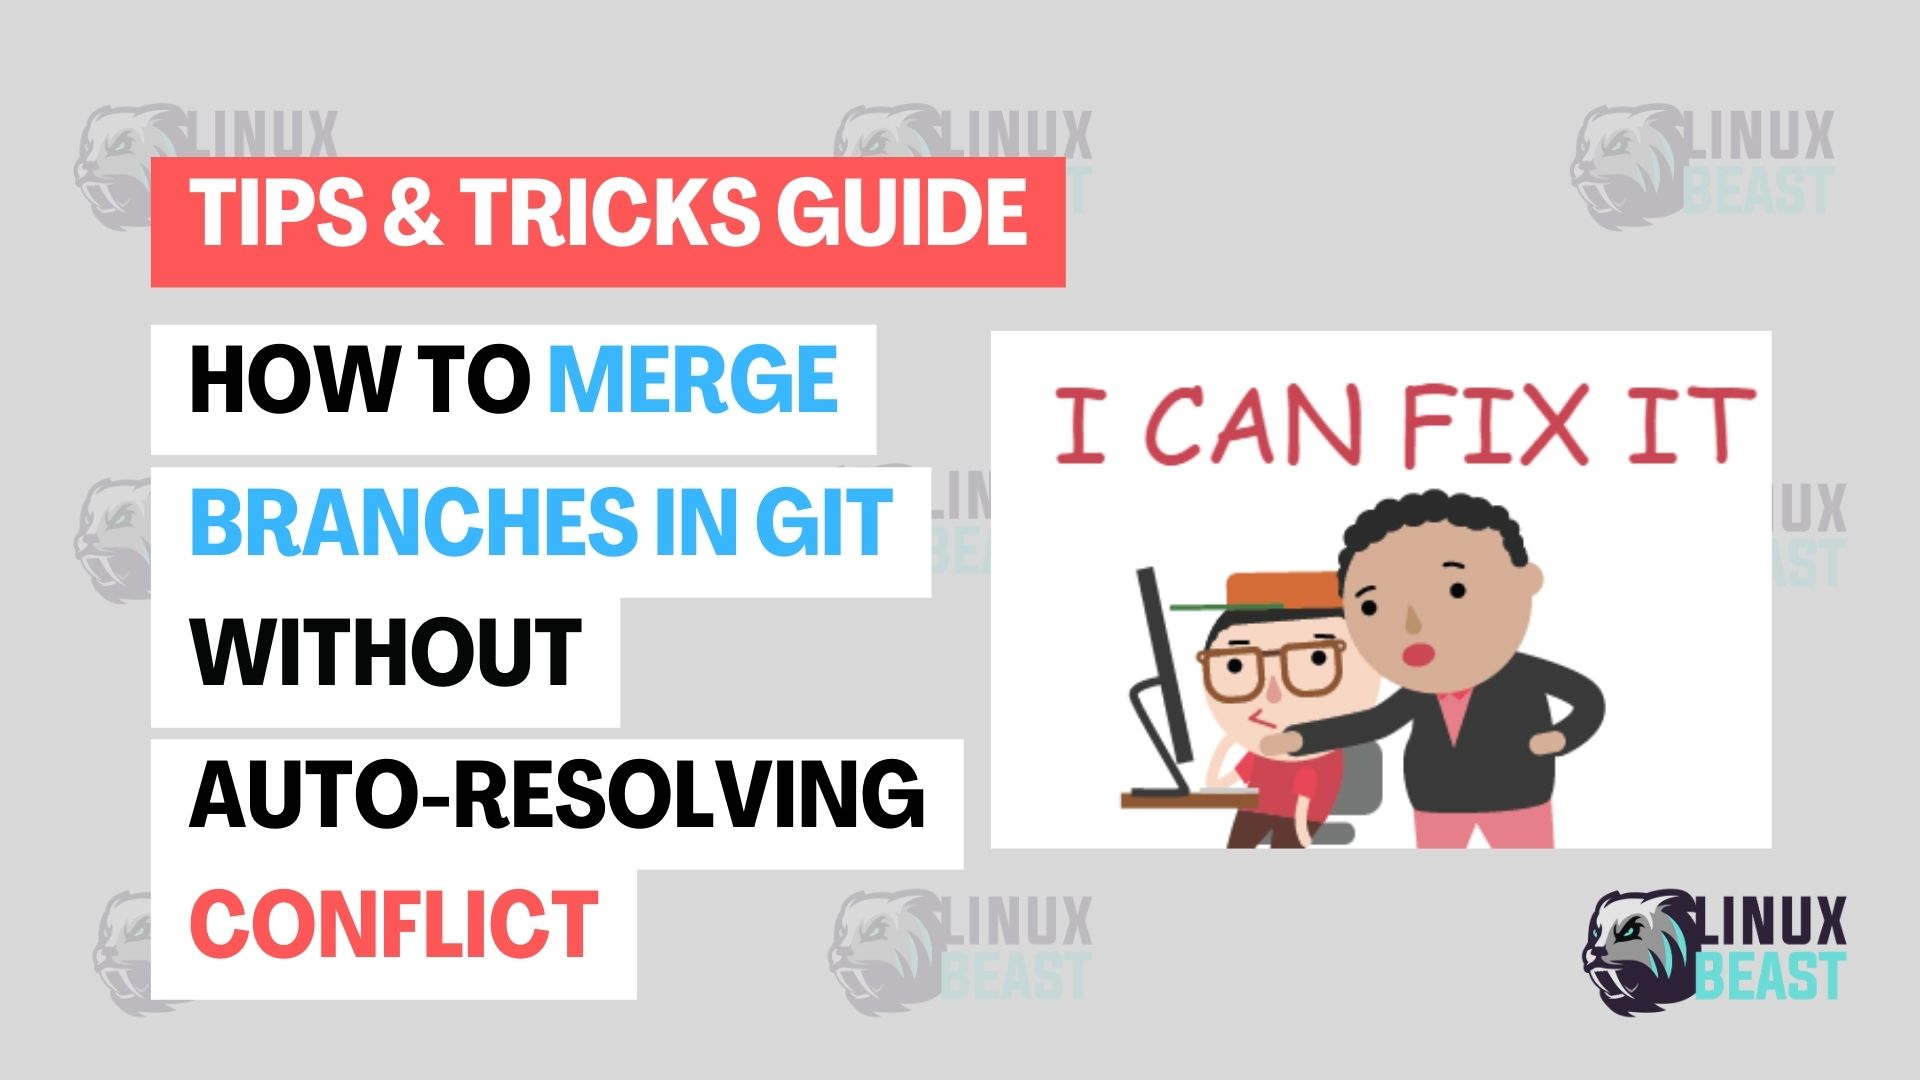 How to Merge Branches in Git Without Auto-Resolving Conflicts